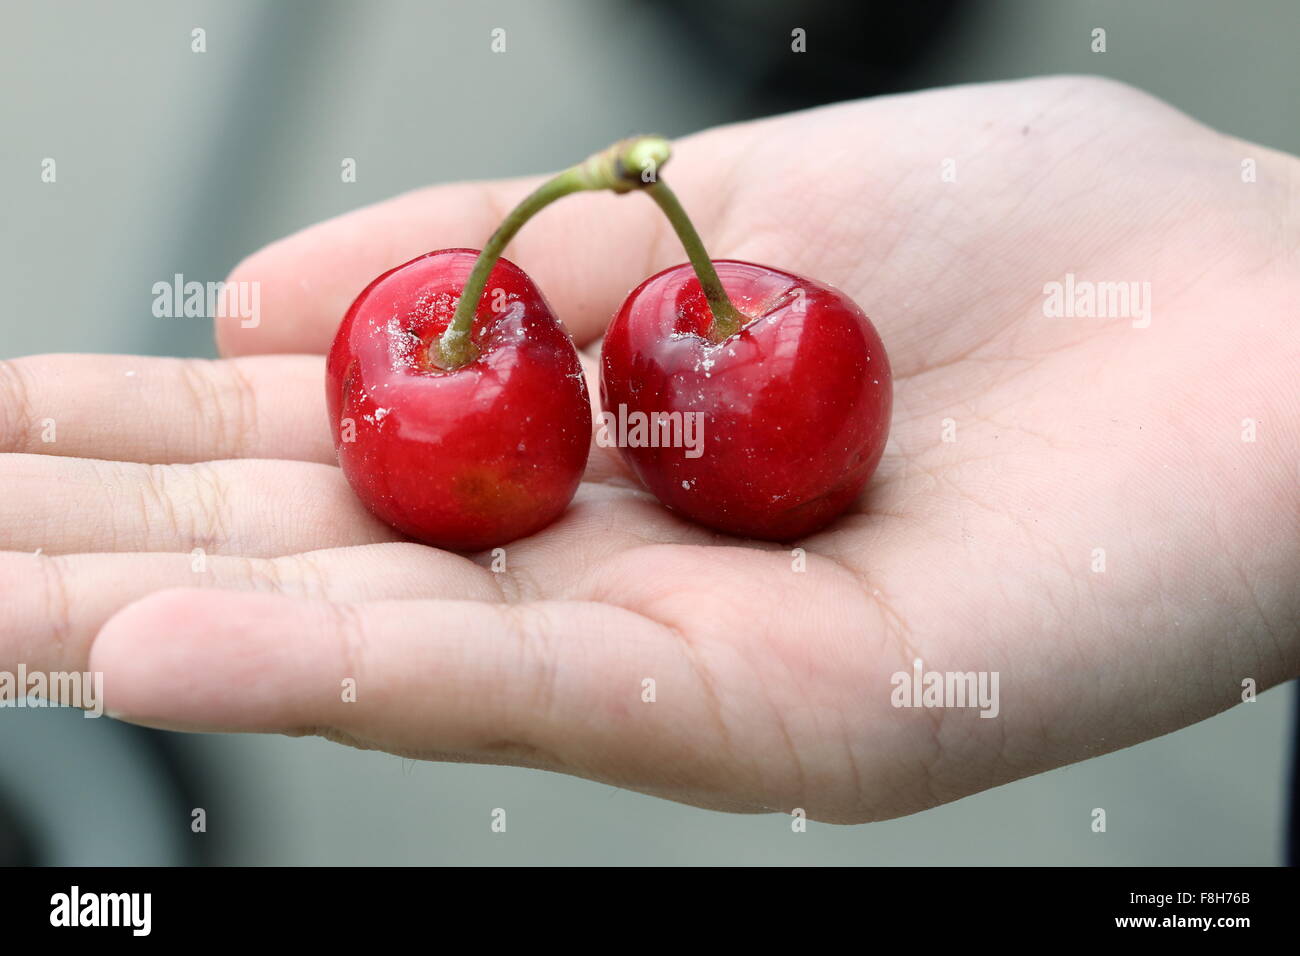 Close up of hand holding  Prunus avium or known as Lapin cherry fruits in hand Stock Photo